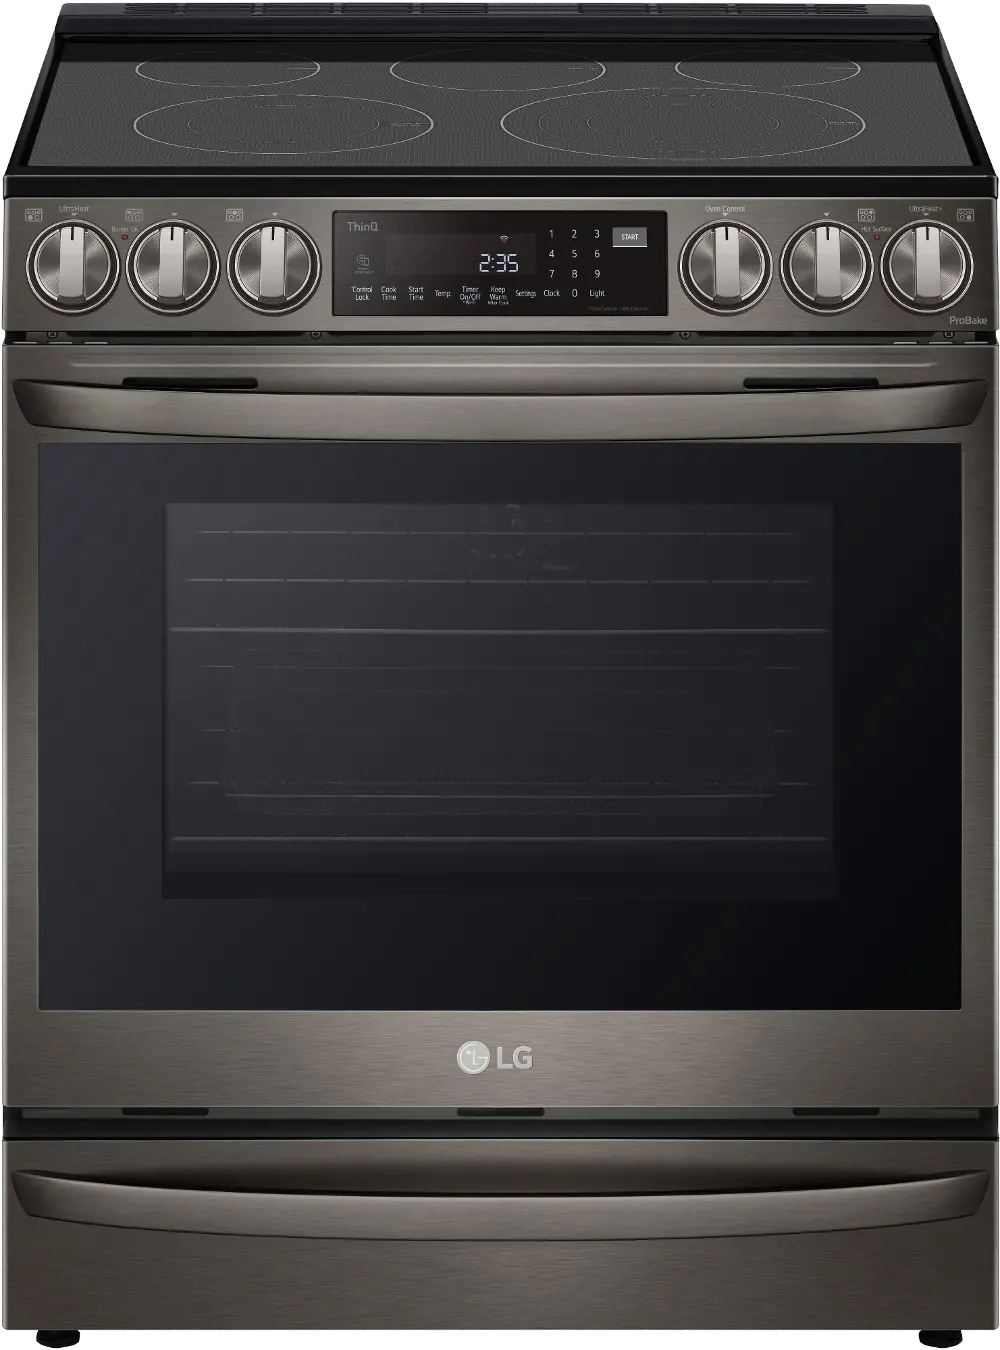 LSEL6337D LG 6.3 cu ft Electric Range with InstaView - Black Stainless Steel-1